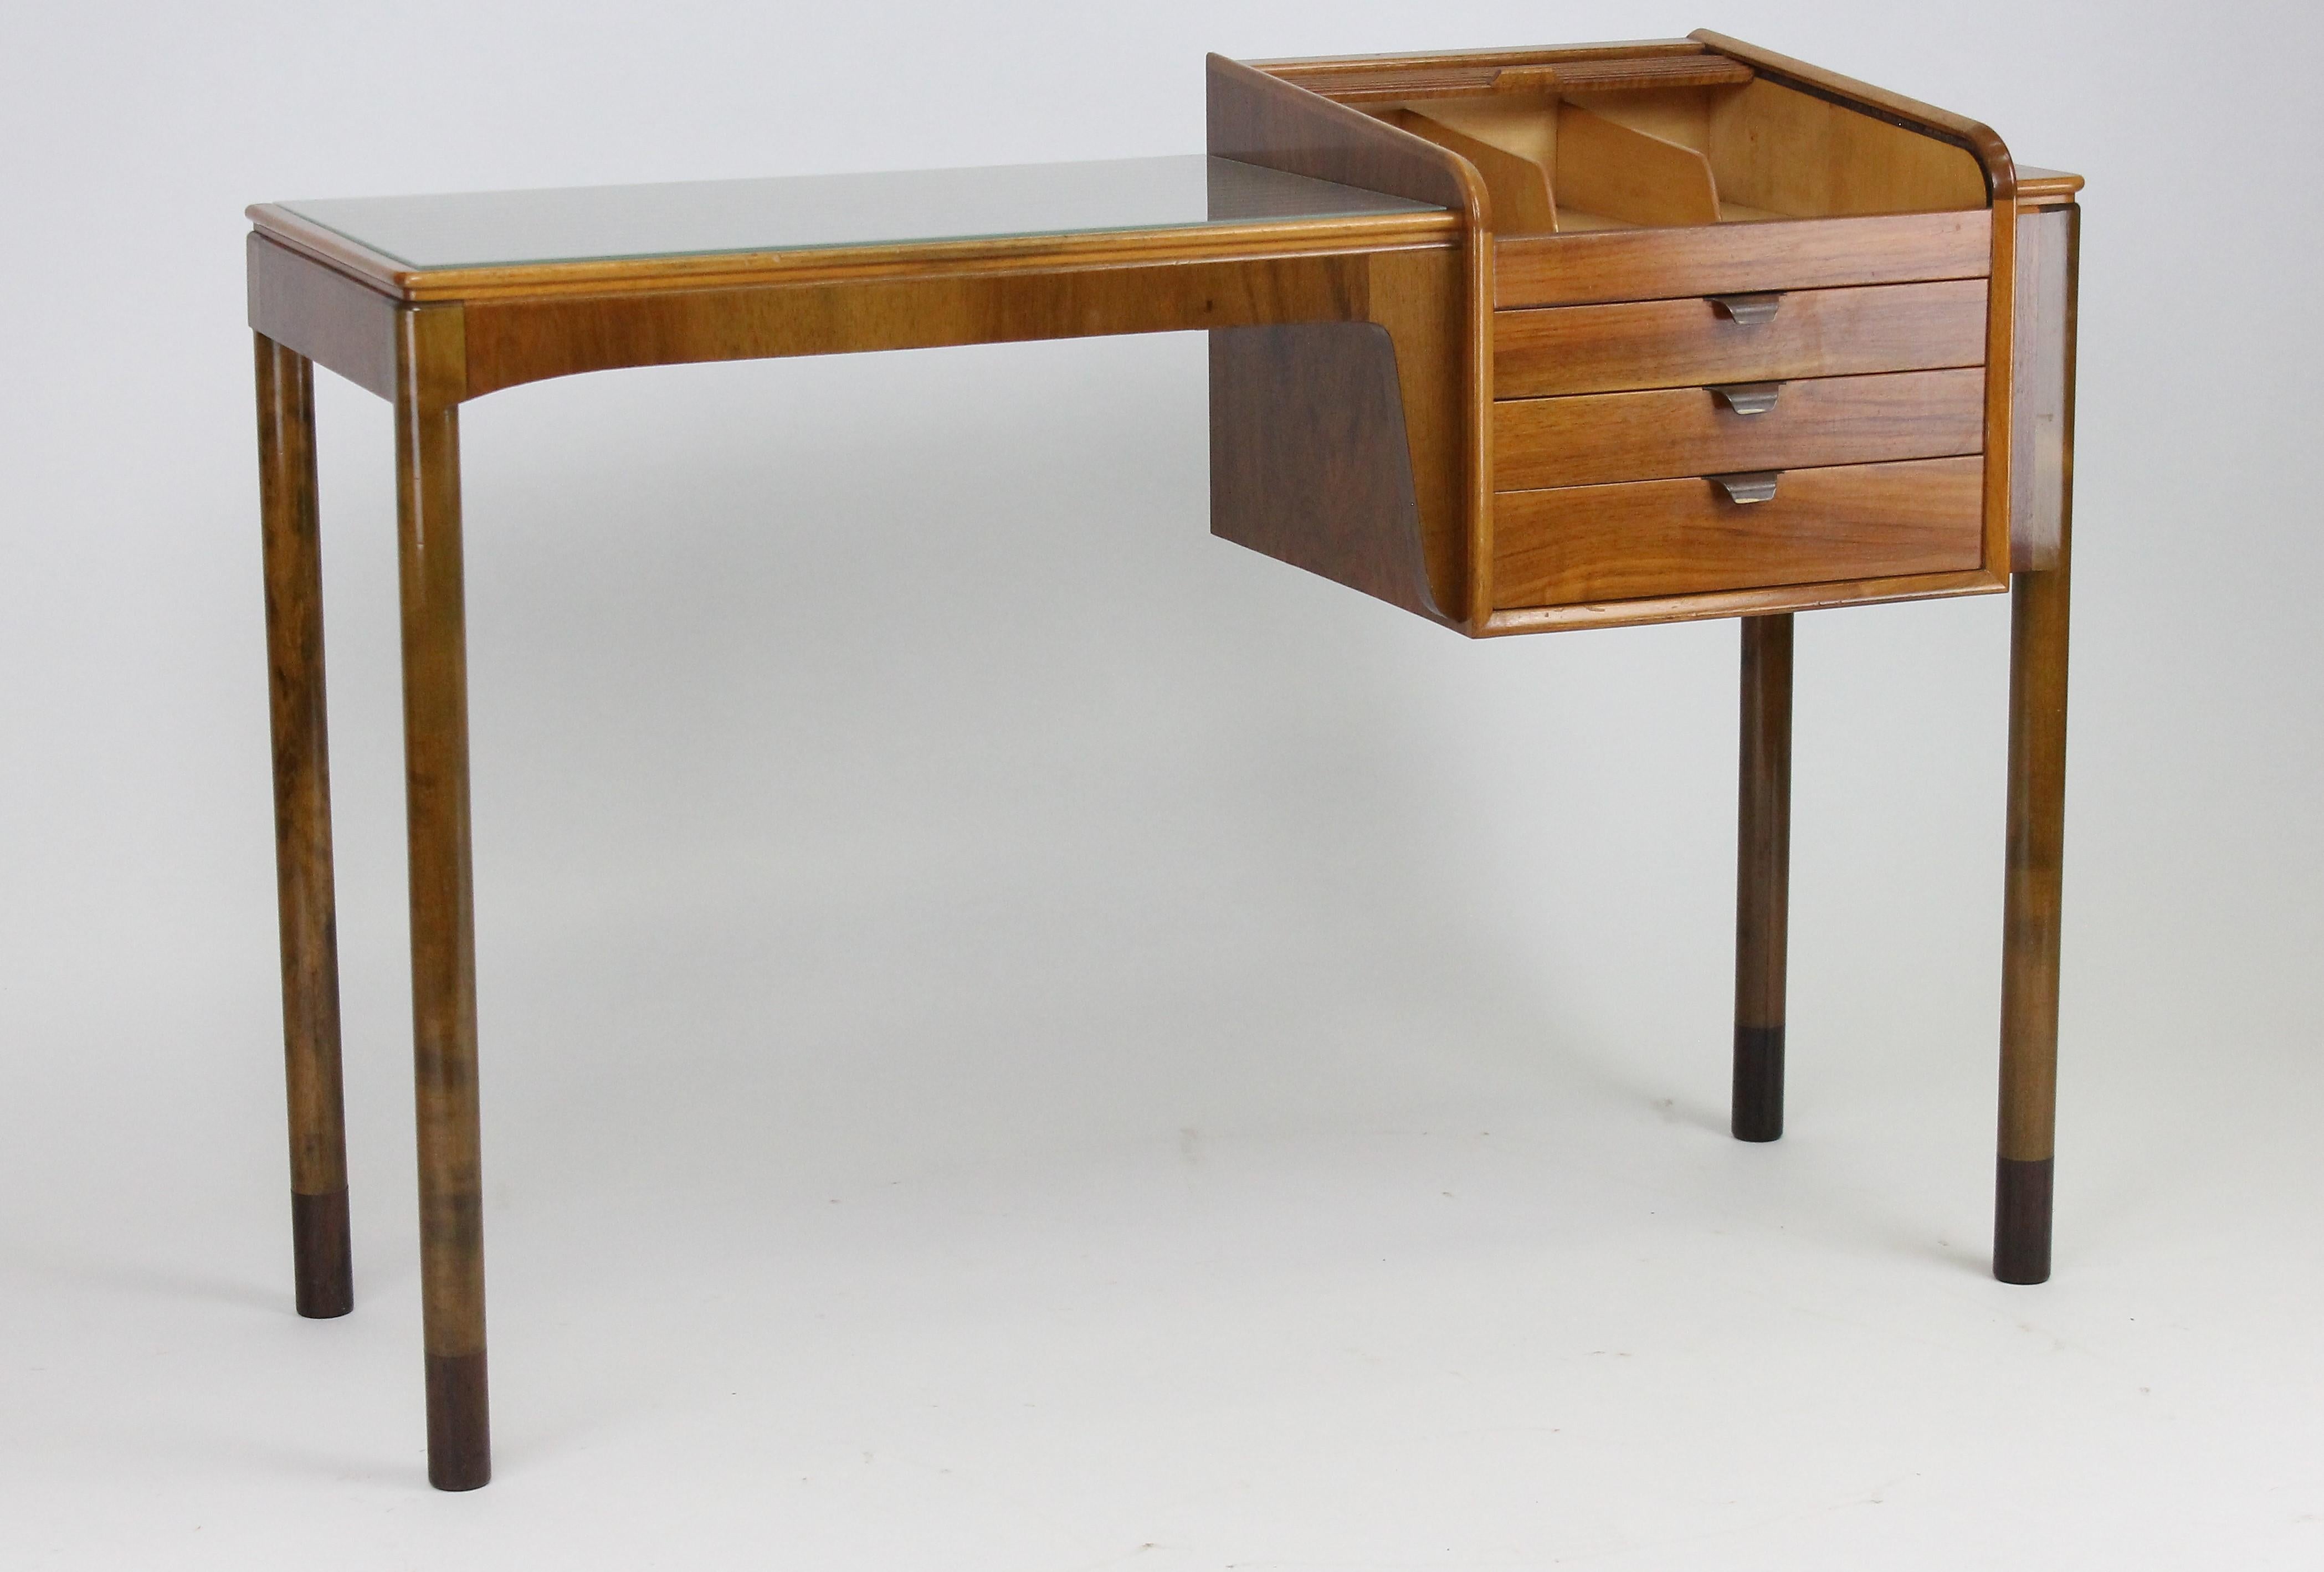 Very nice and unusual dressing table attributed to Carl-Axel Acking.
If you remove the mirror you can use this piece as a small writing desk.
Perfect for a laptop.
Nice original condition.
Height without the mirror, 76cm. The mirror is